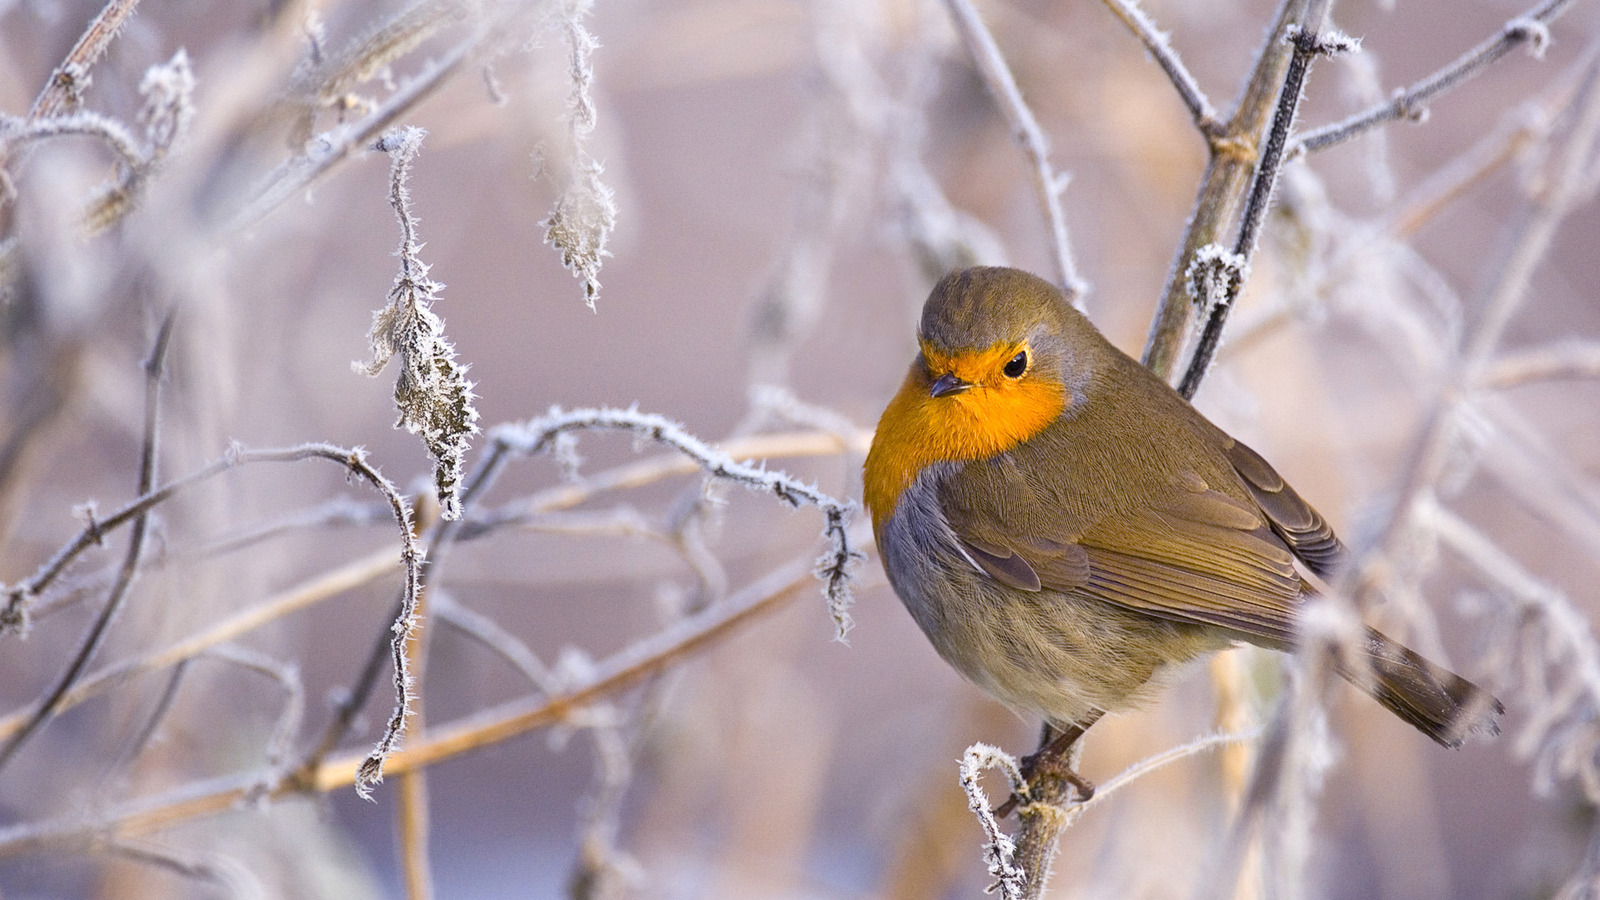 Robin in Snow-Covered Tree